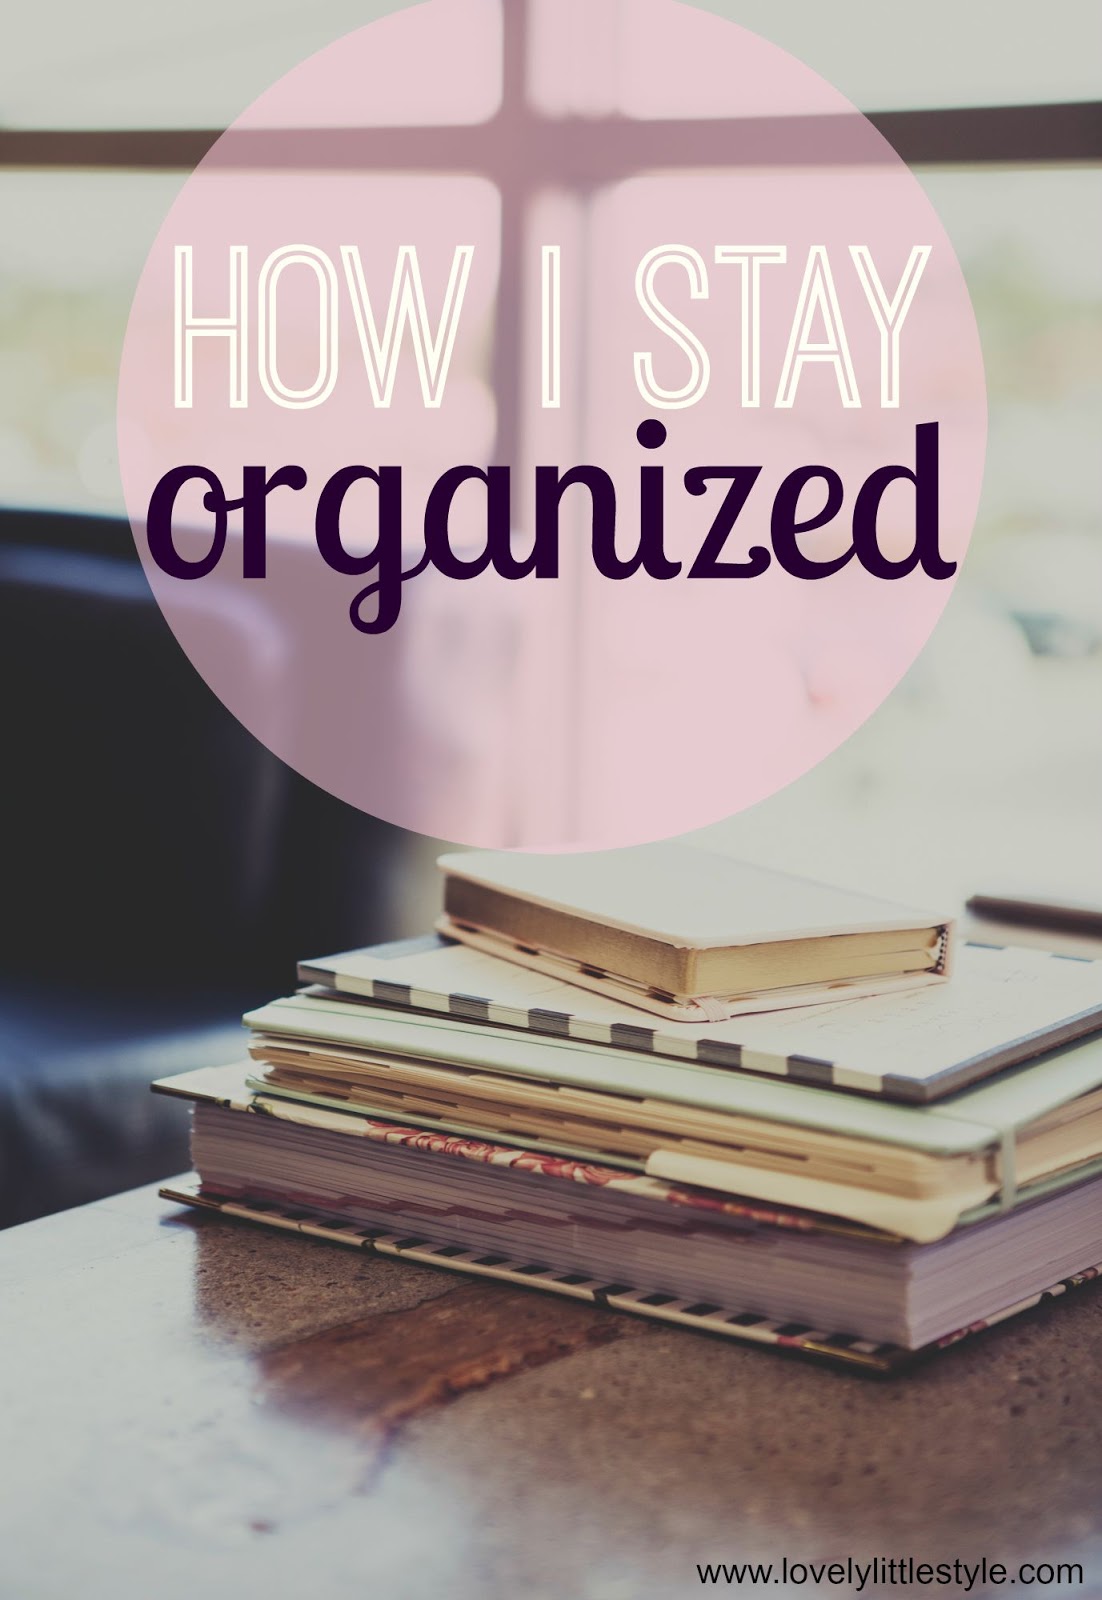 How I Stay Organized - Welcome to Olivia Rink